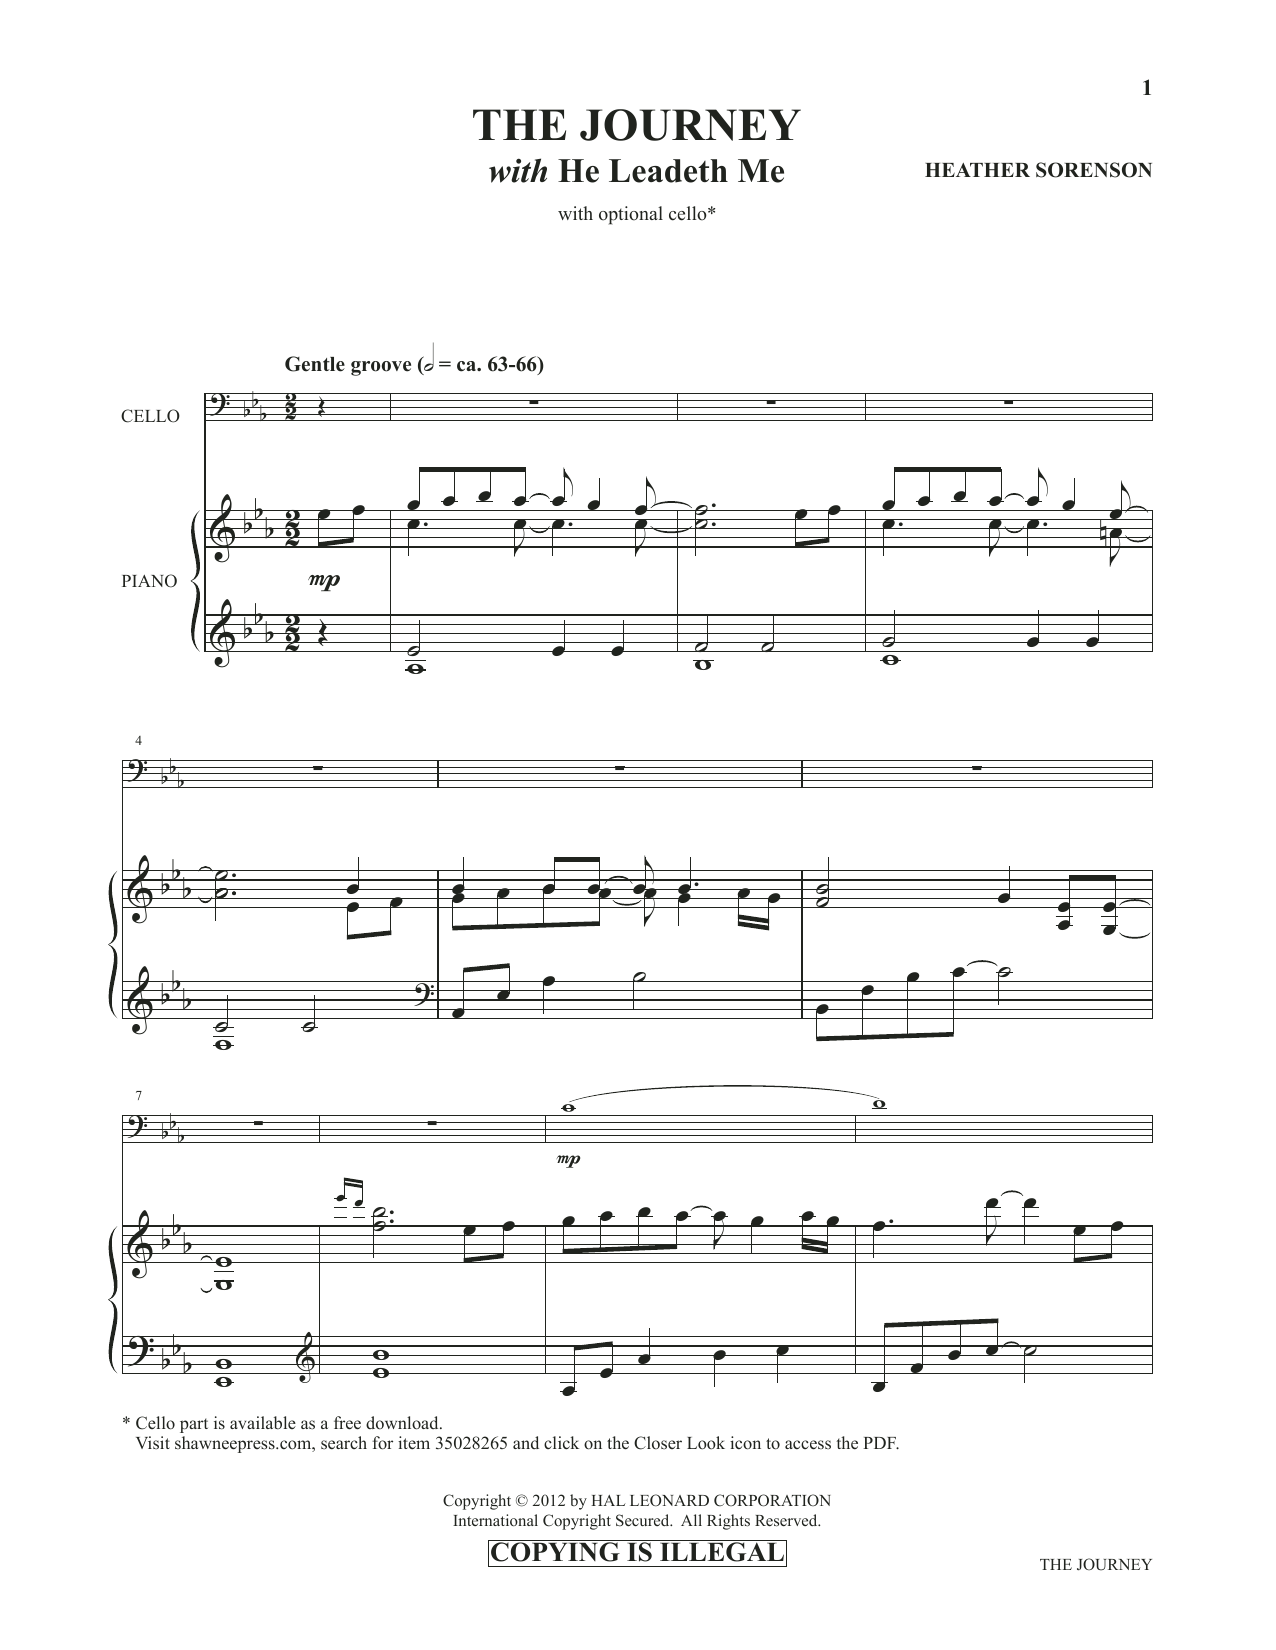 Download Heather Sorenson The Journey (with He Leadeth Me) (from Sheet Music